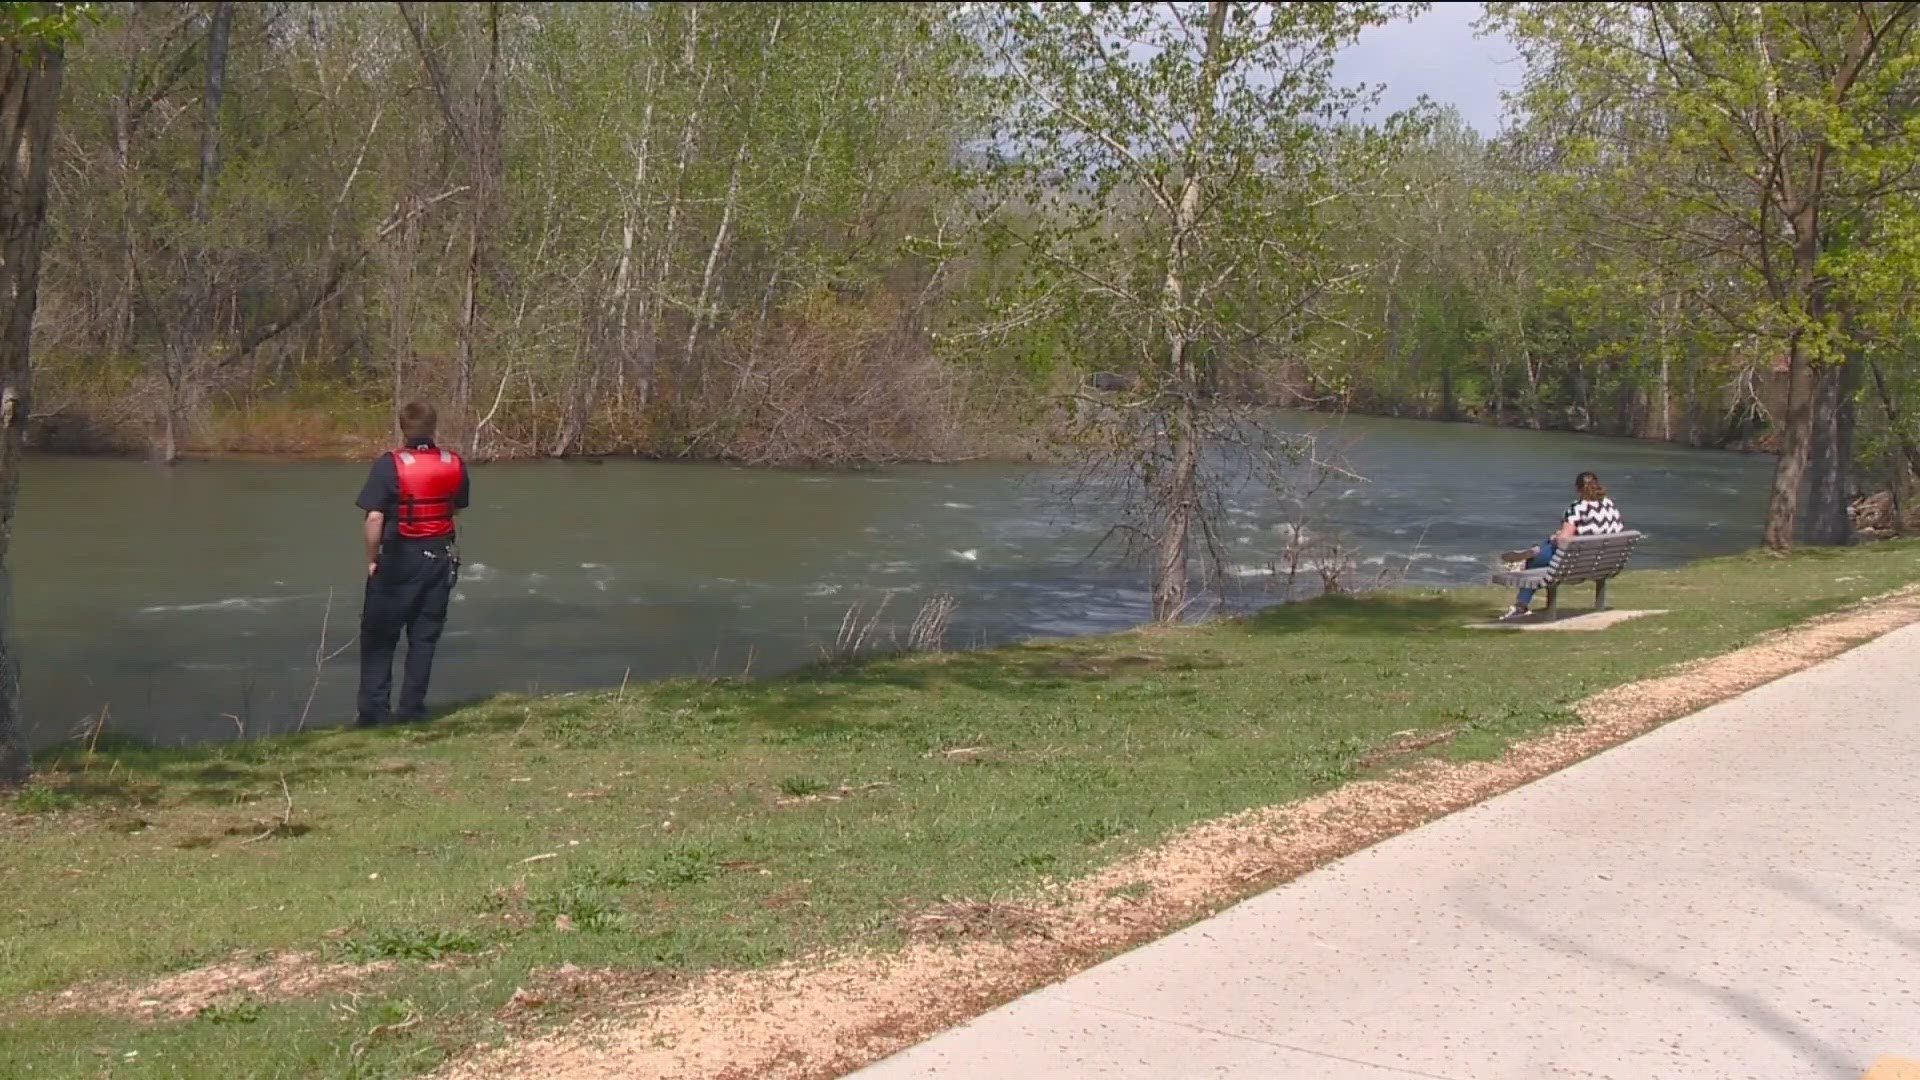 The body was pulled from the river by the Boise Fire Dive Rescue Team during training close to where the kayaker was last seen.